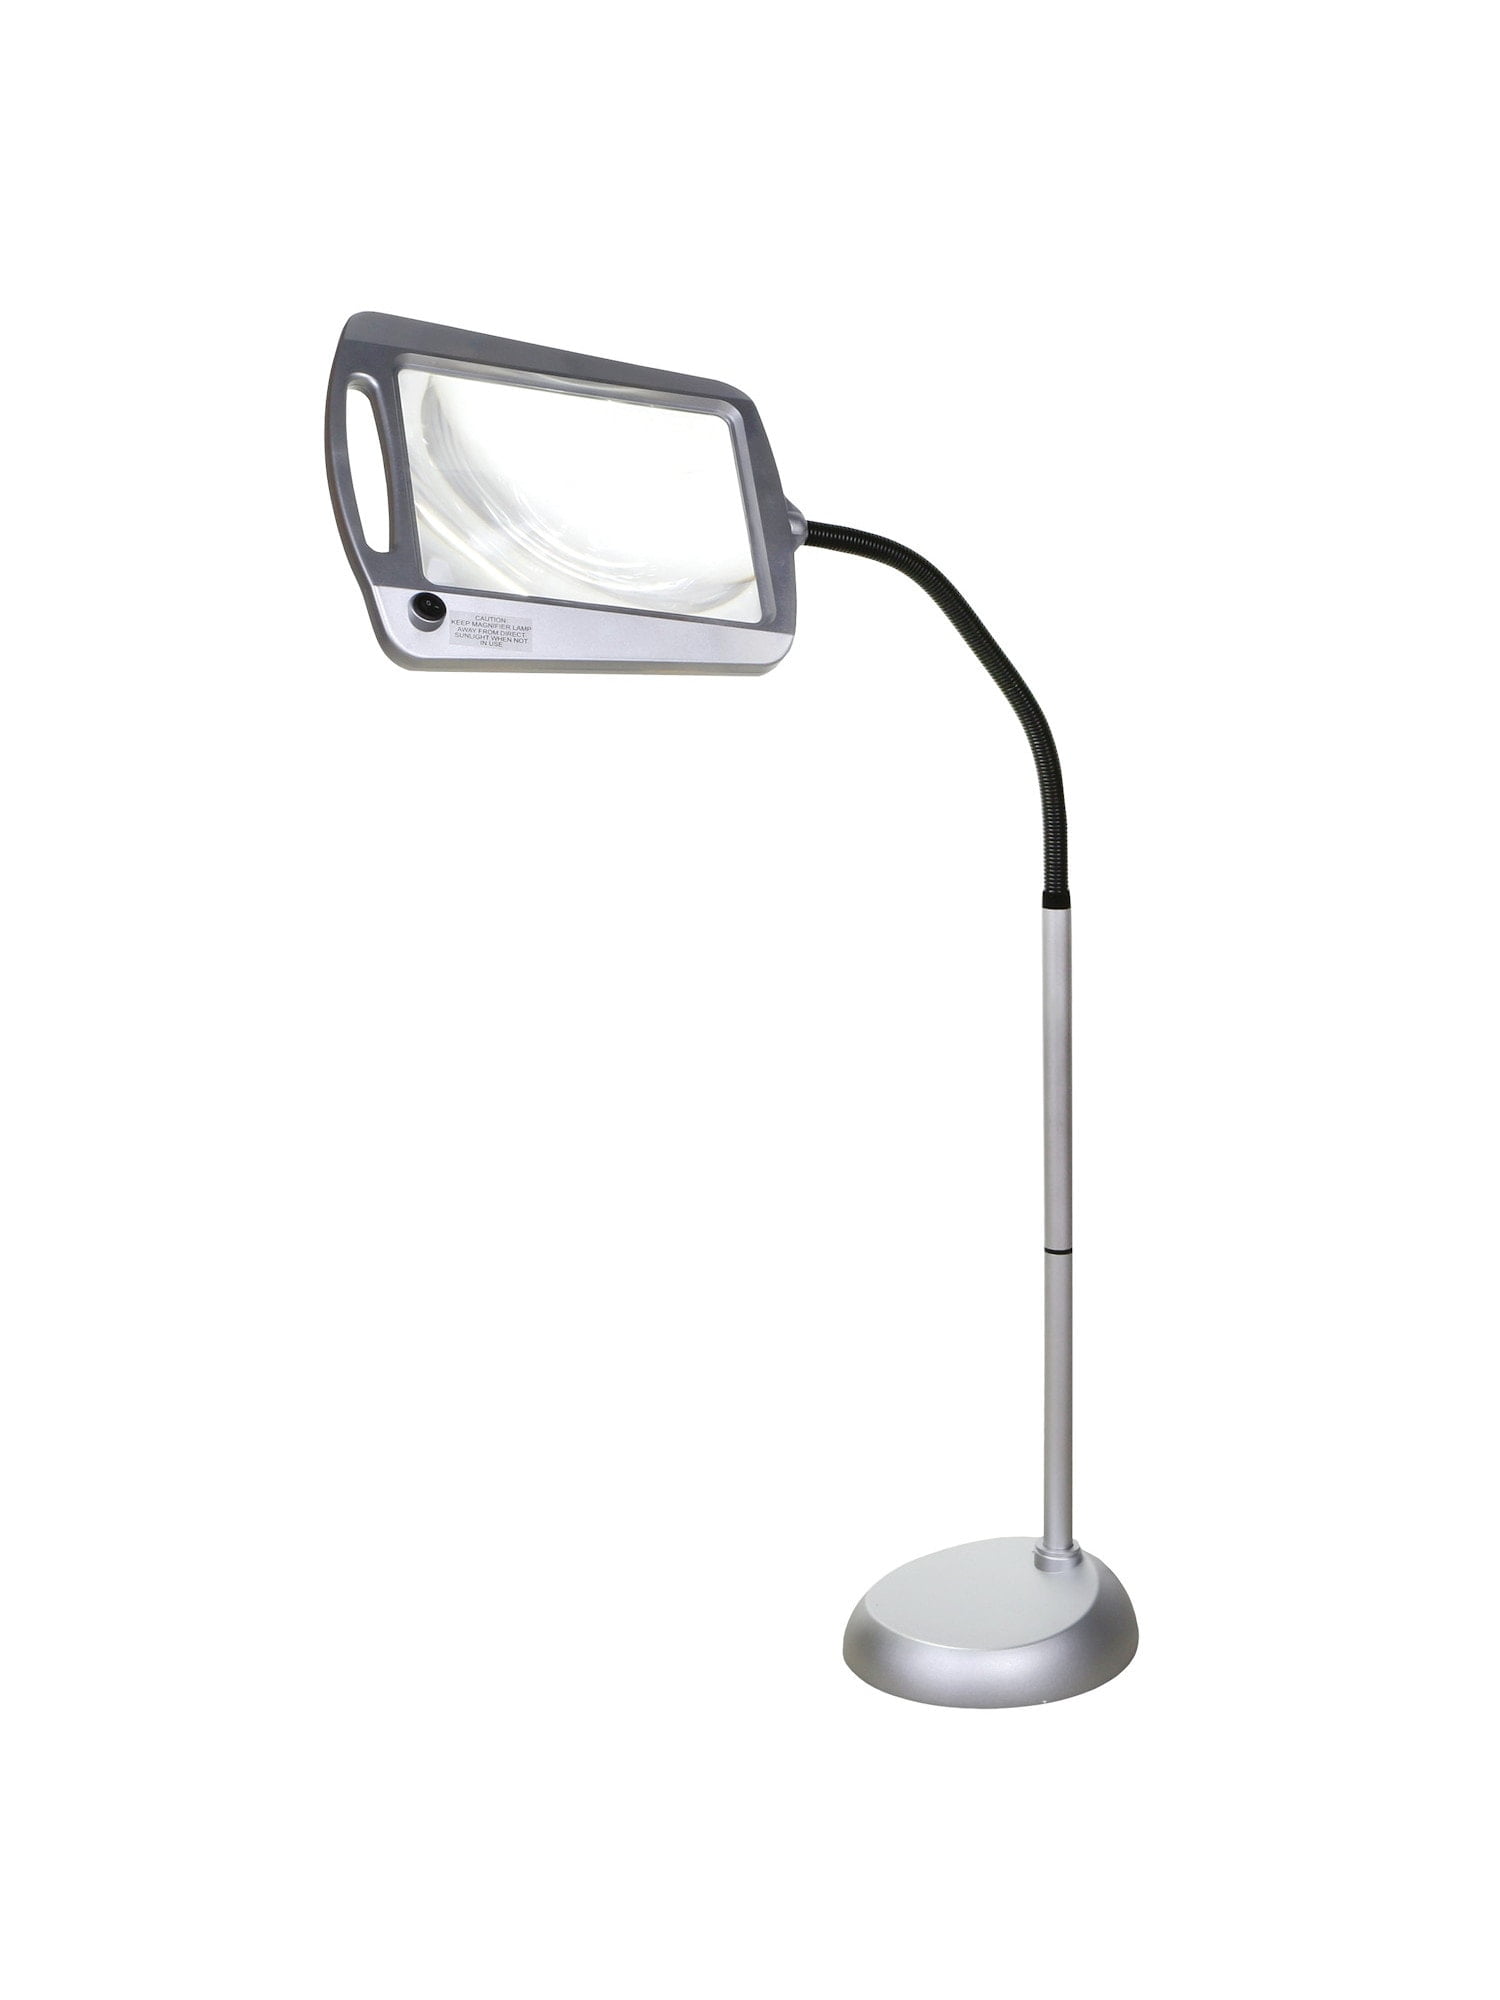 Daylight™ Convertible 5 LED Floor and Table Magnifying Lamp - RioGrande